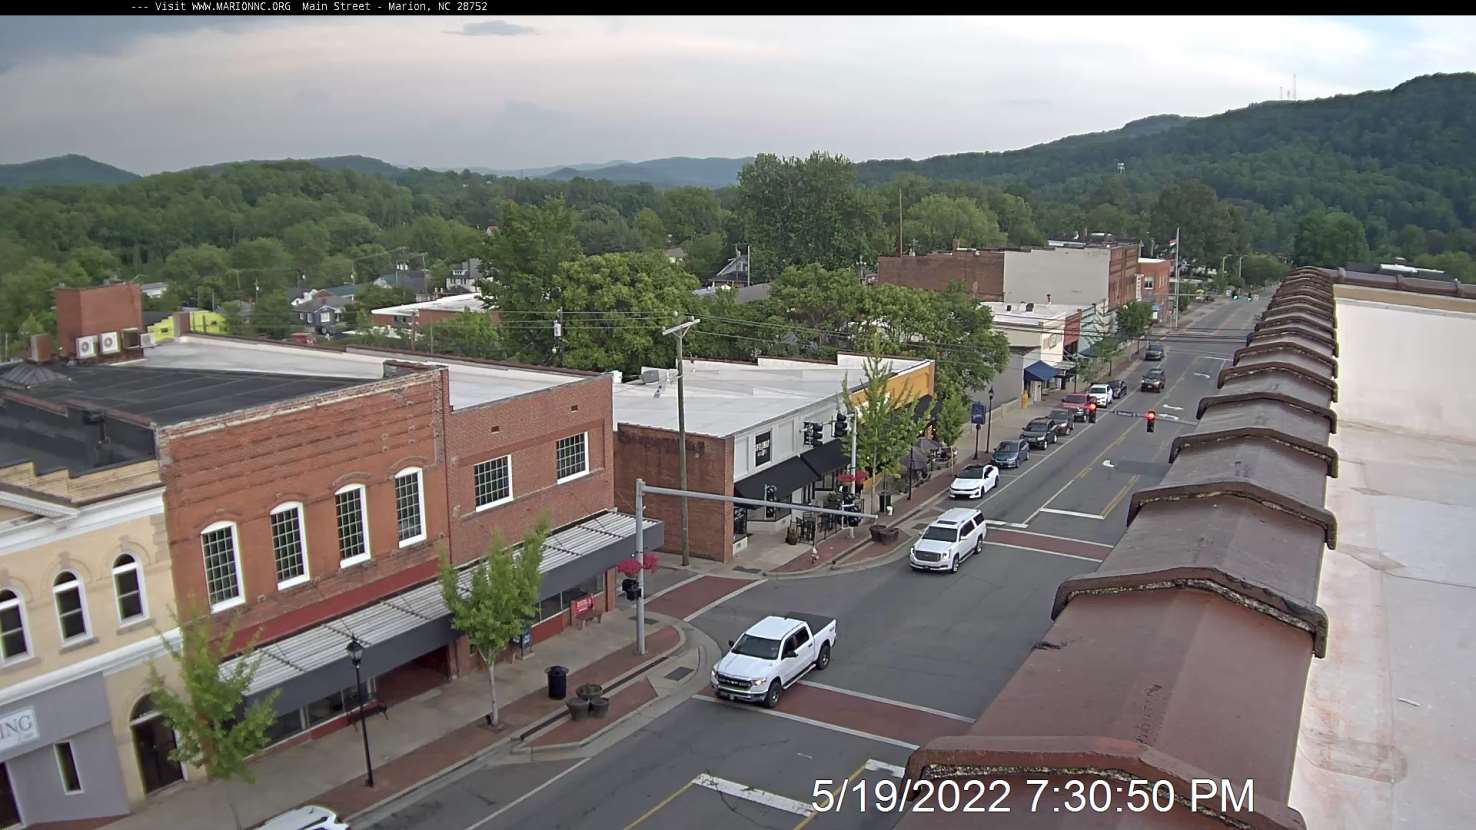 Marion, NC - Main St. South View - USA